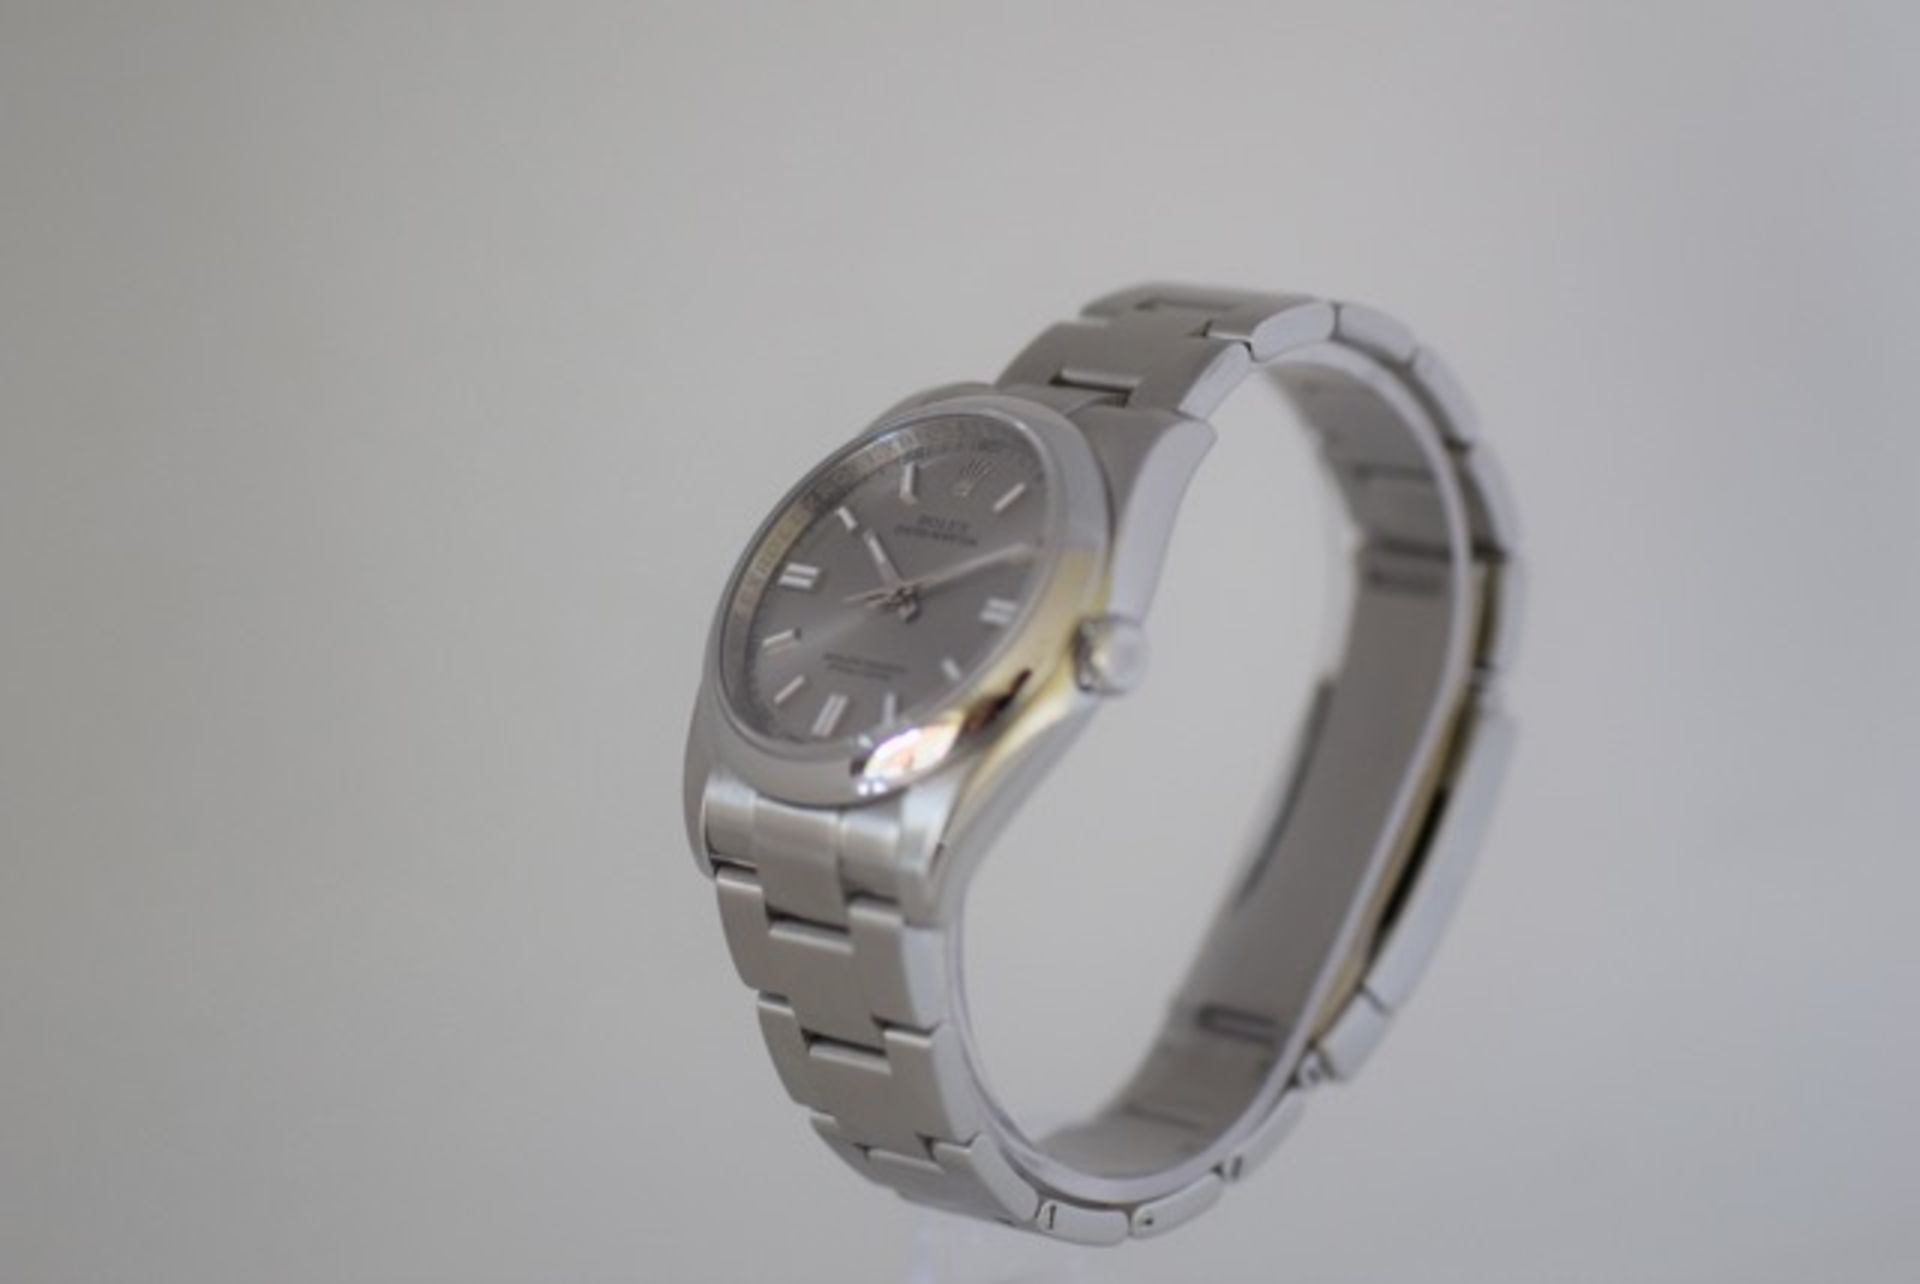 ROLEX OYSTER 116000 WATCH - Image 6 of 8